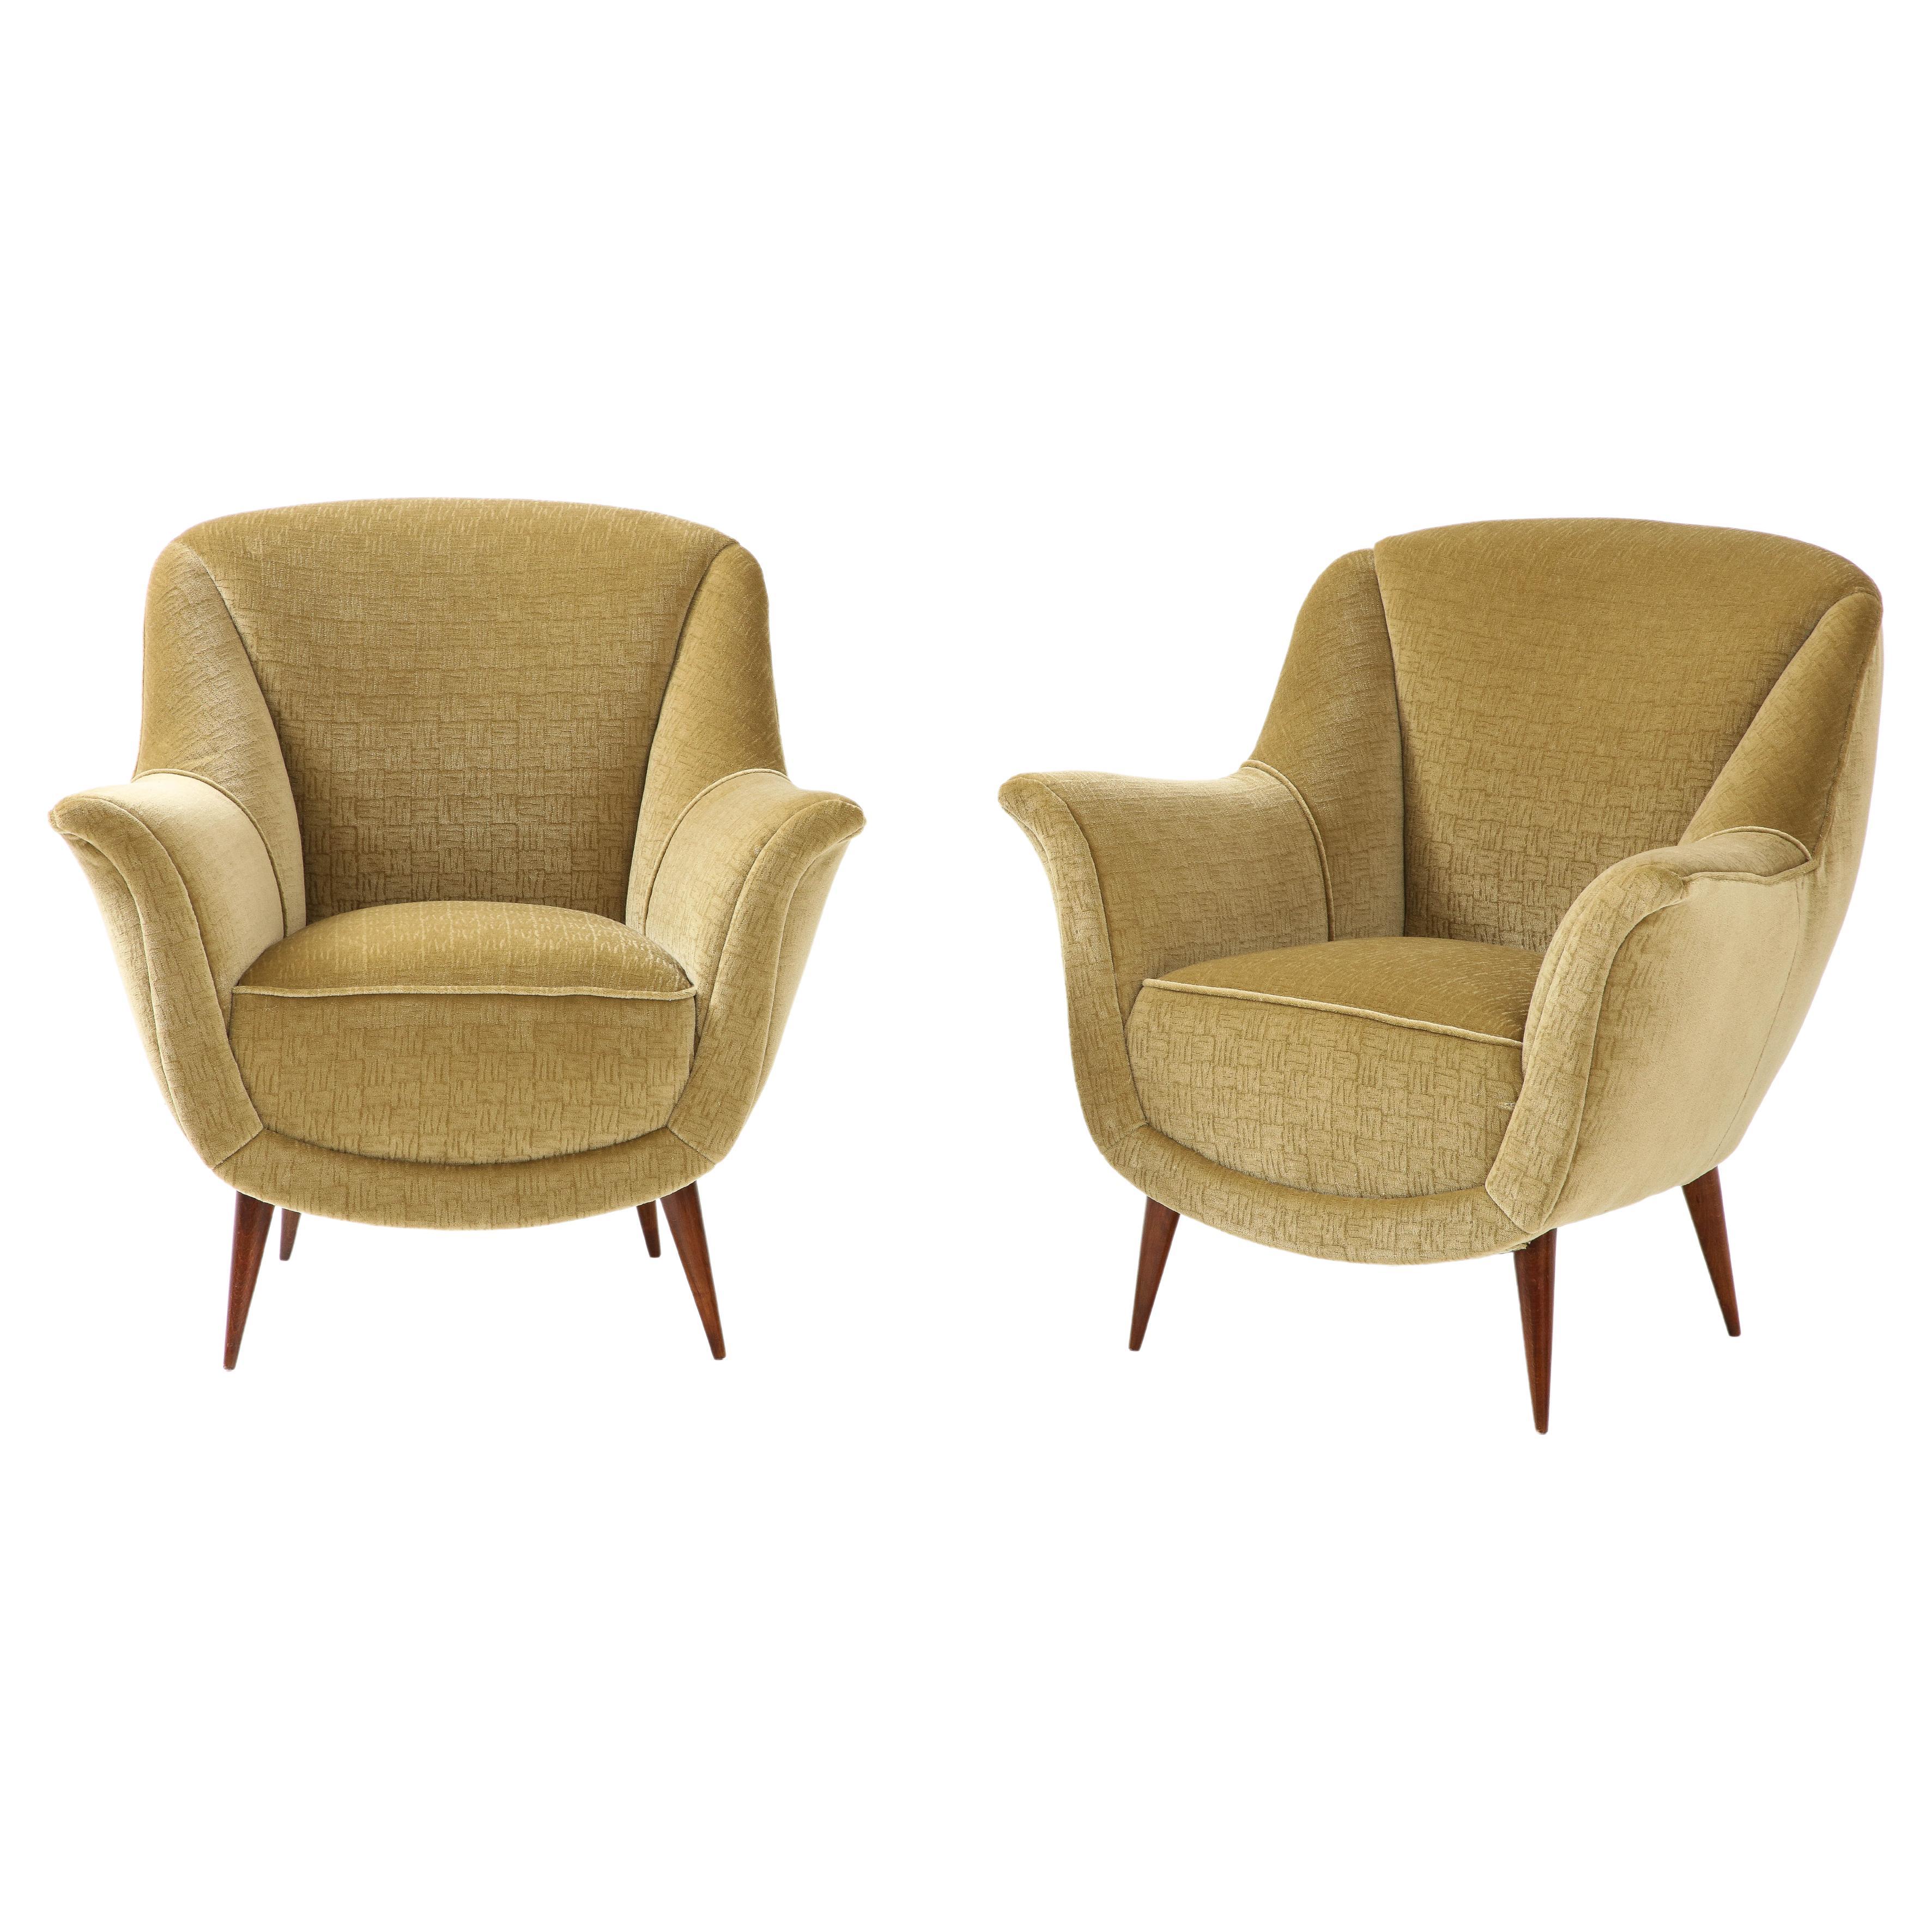 1950's Modernist Gio Ponti Style Italian Lounge Chairs In Mohair Polsterung im Angebot